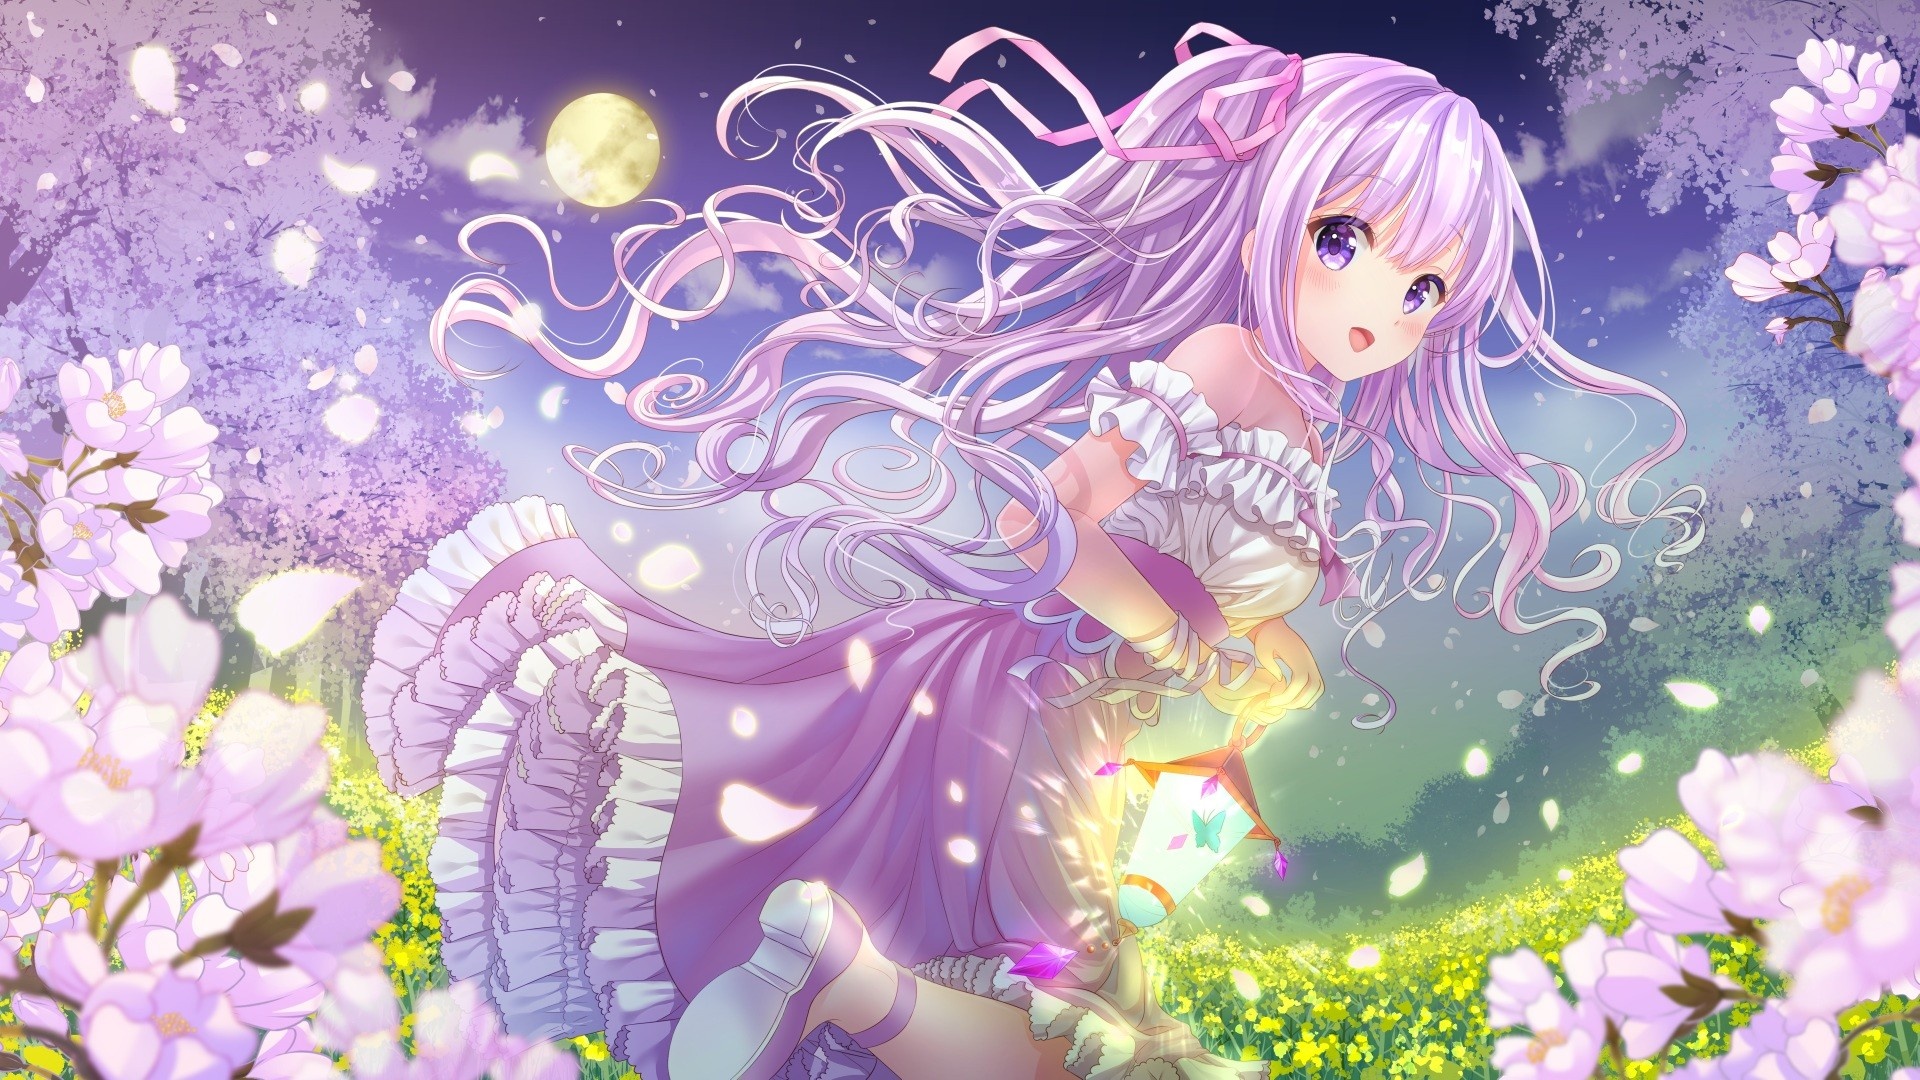 Anime Girl And Flowers pc wallpaper